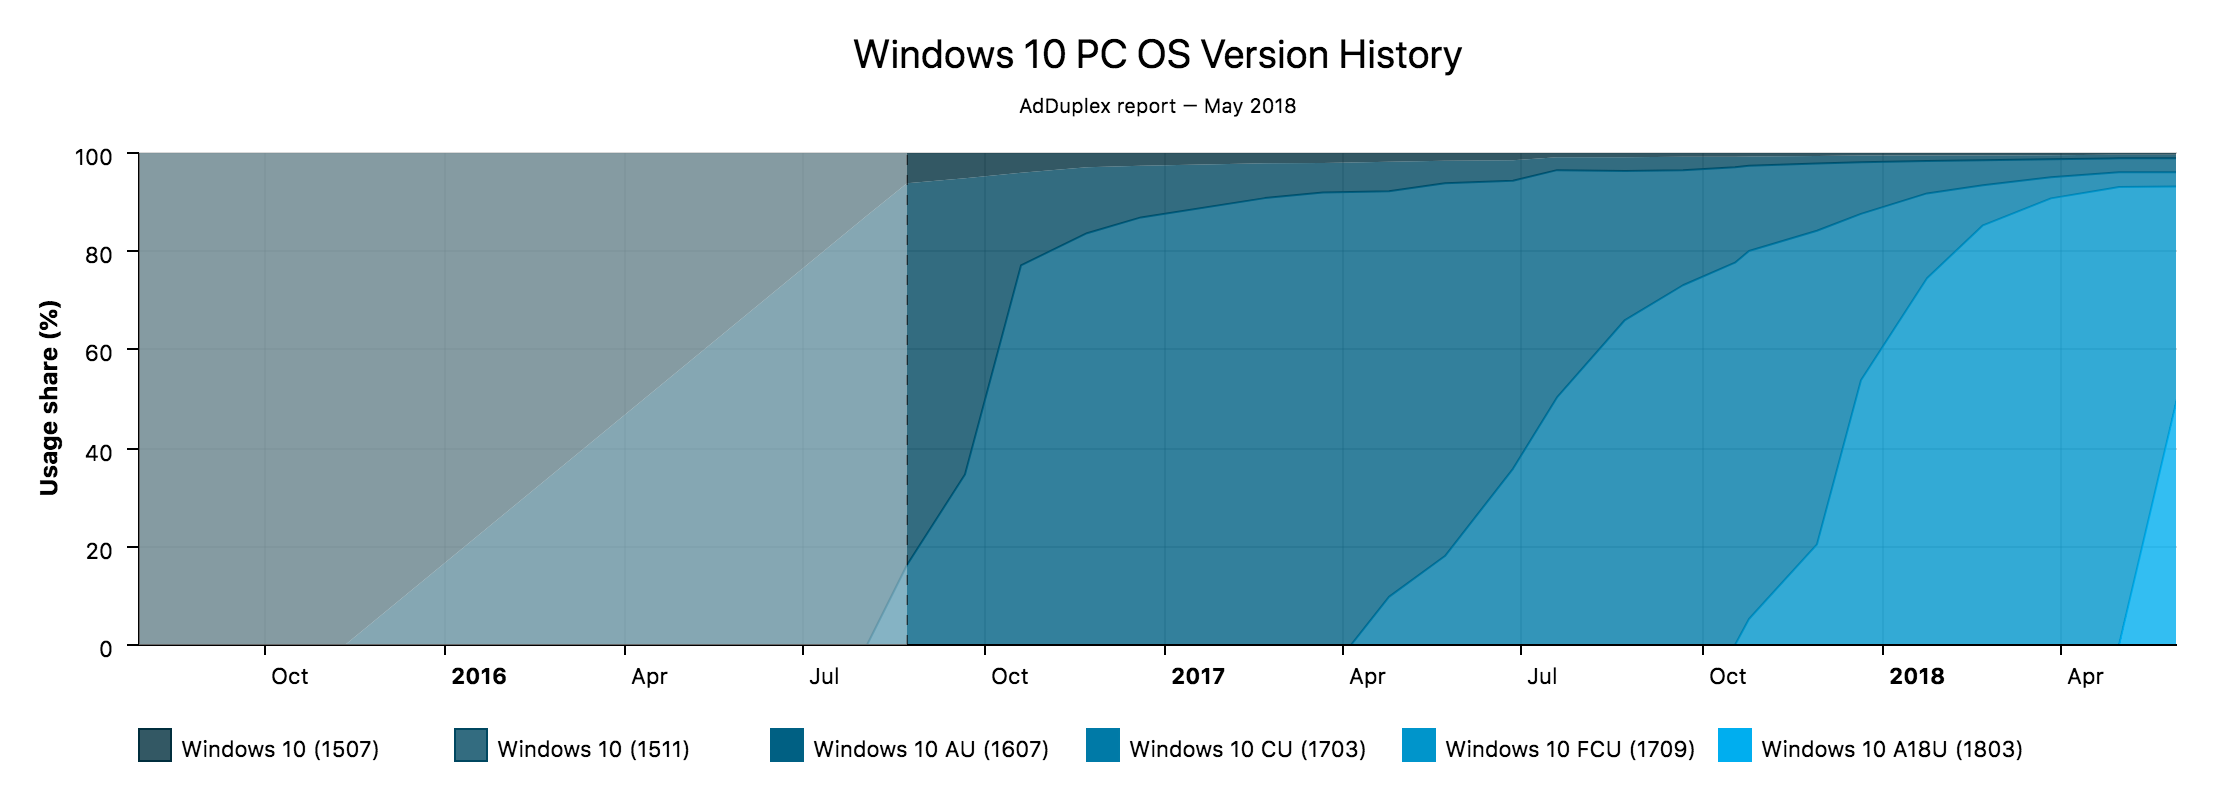 Windows-10-PC-OS-Version-History.png